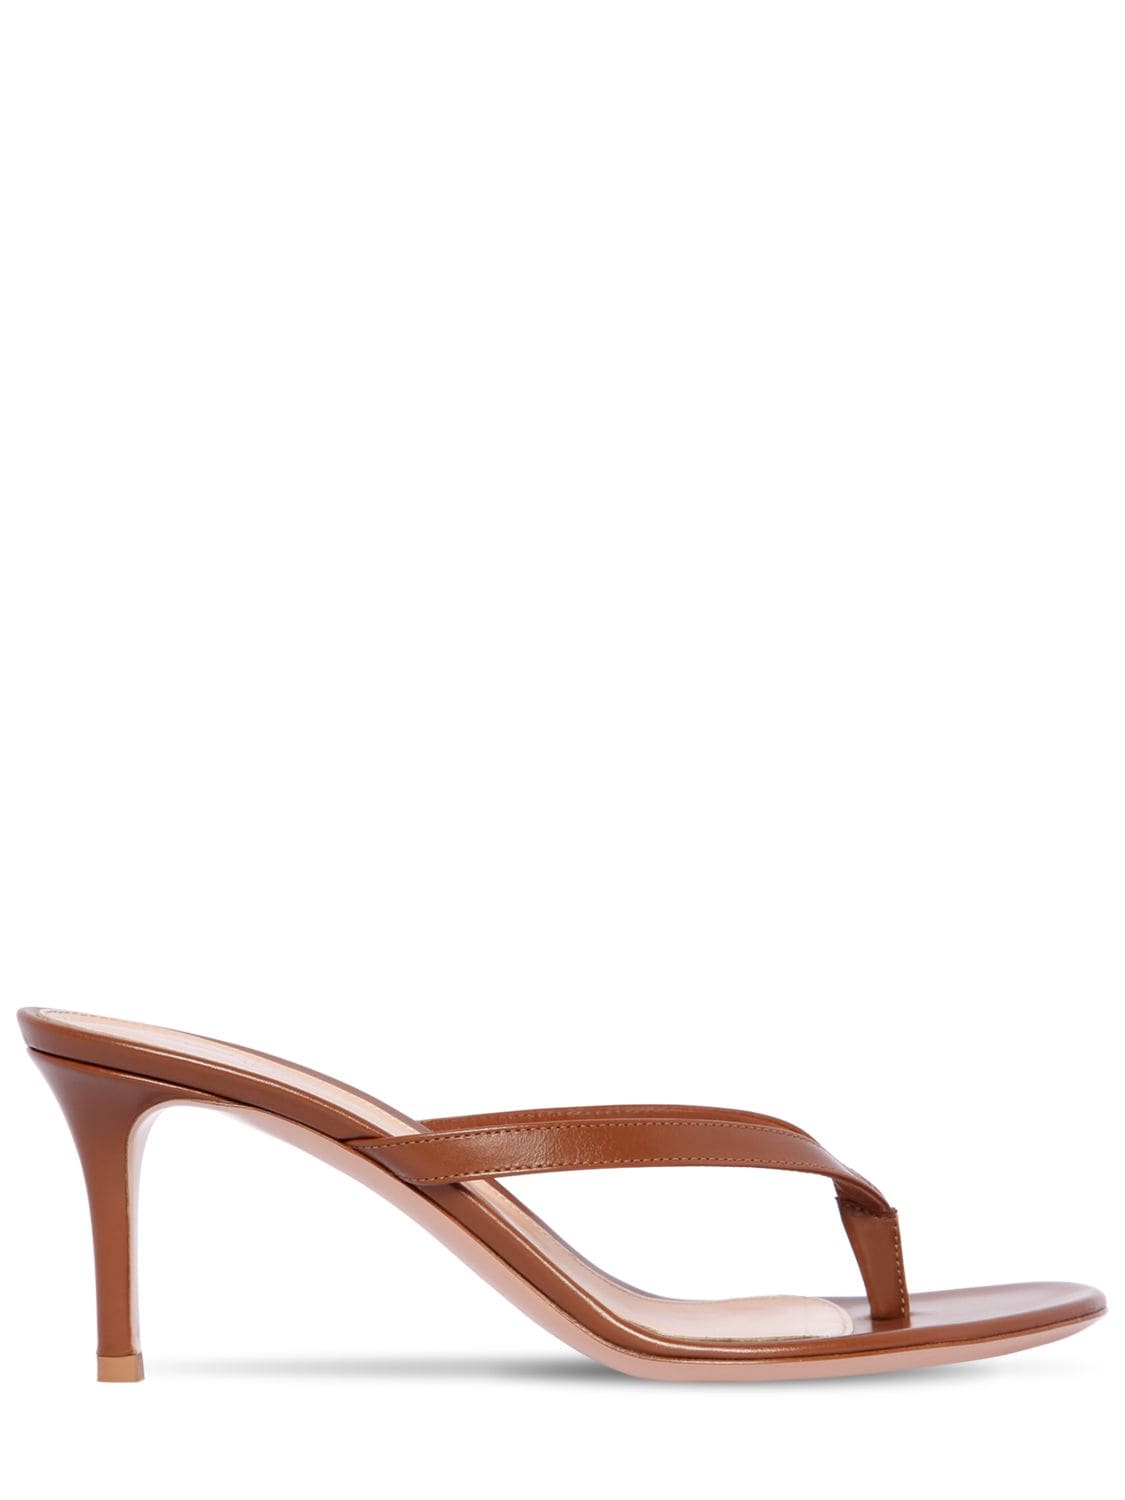 GIANVITO ROSSI 70MM LEATHER THONG SANDALS,71IAI4015-Q1VPSU81